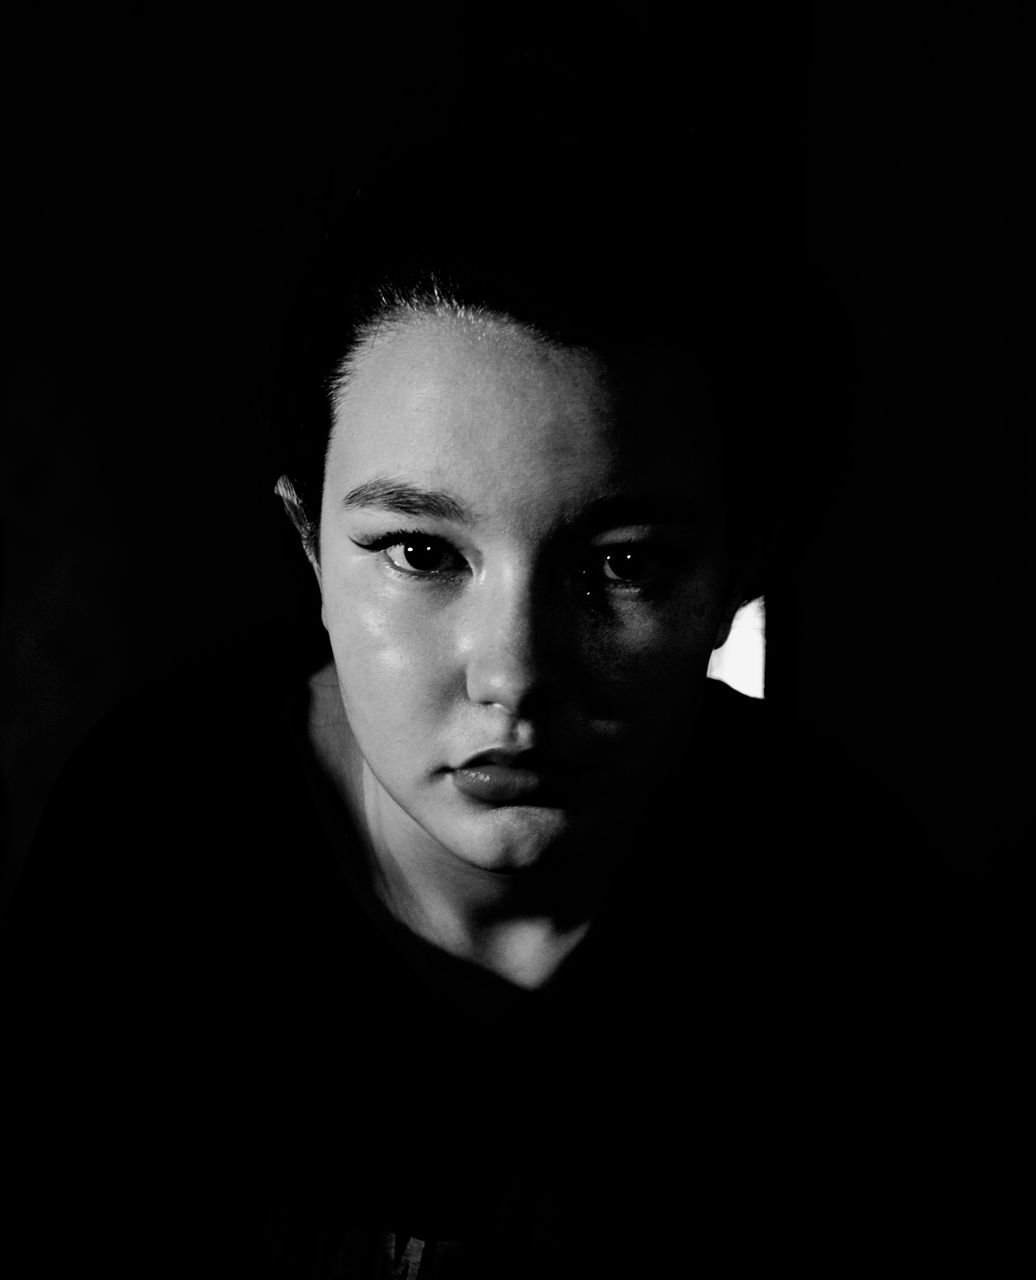 portrait, black, one person, black and white, darkness, headshot, looking at camera, black background, indoors, adult, monochrome photography, studio shot, front view, monochrome, young adult, dark, white, women, serious, copy space, human face, close-up, lifestyles, portrait photography